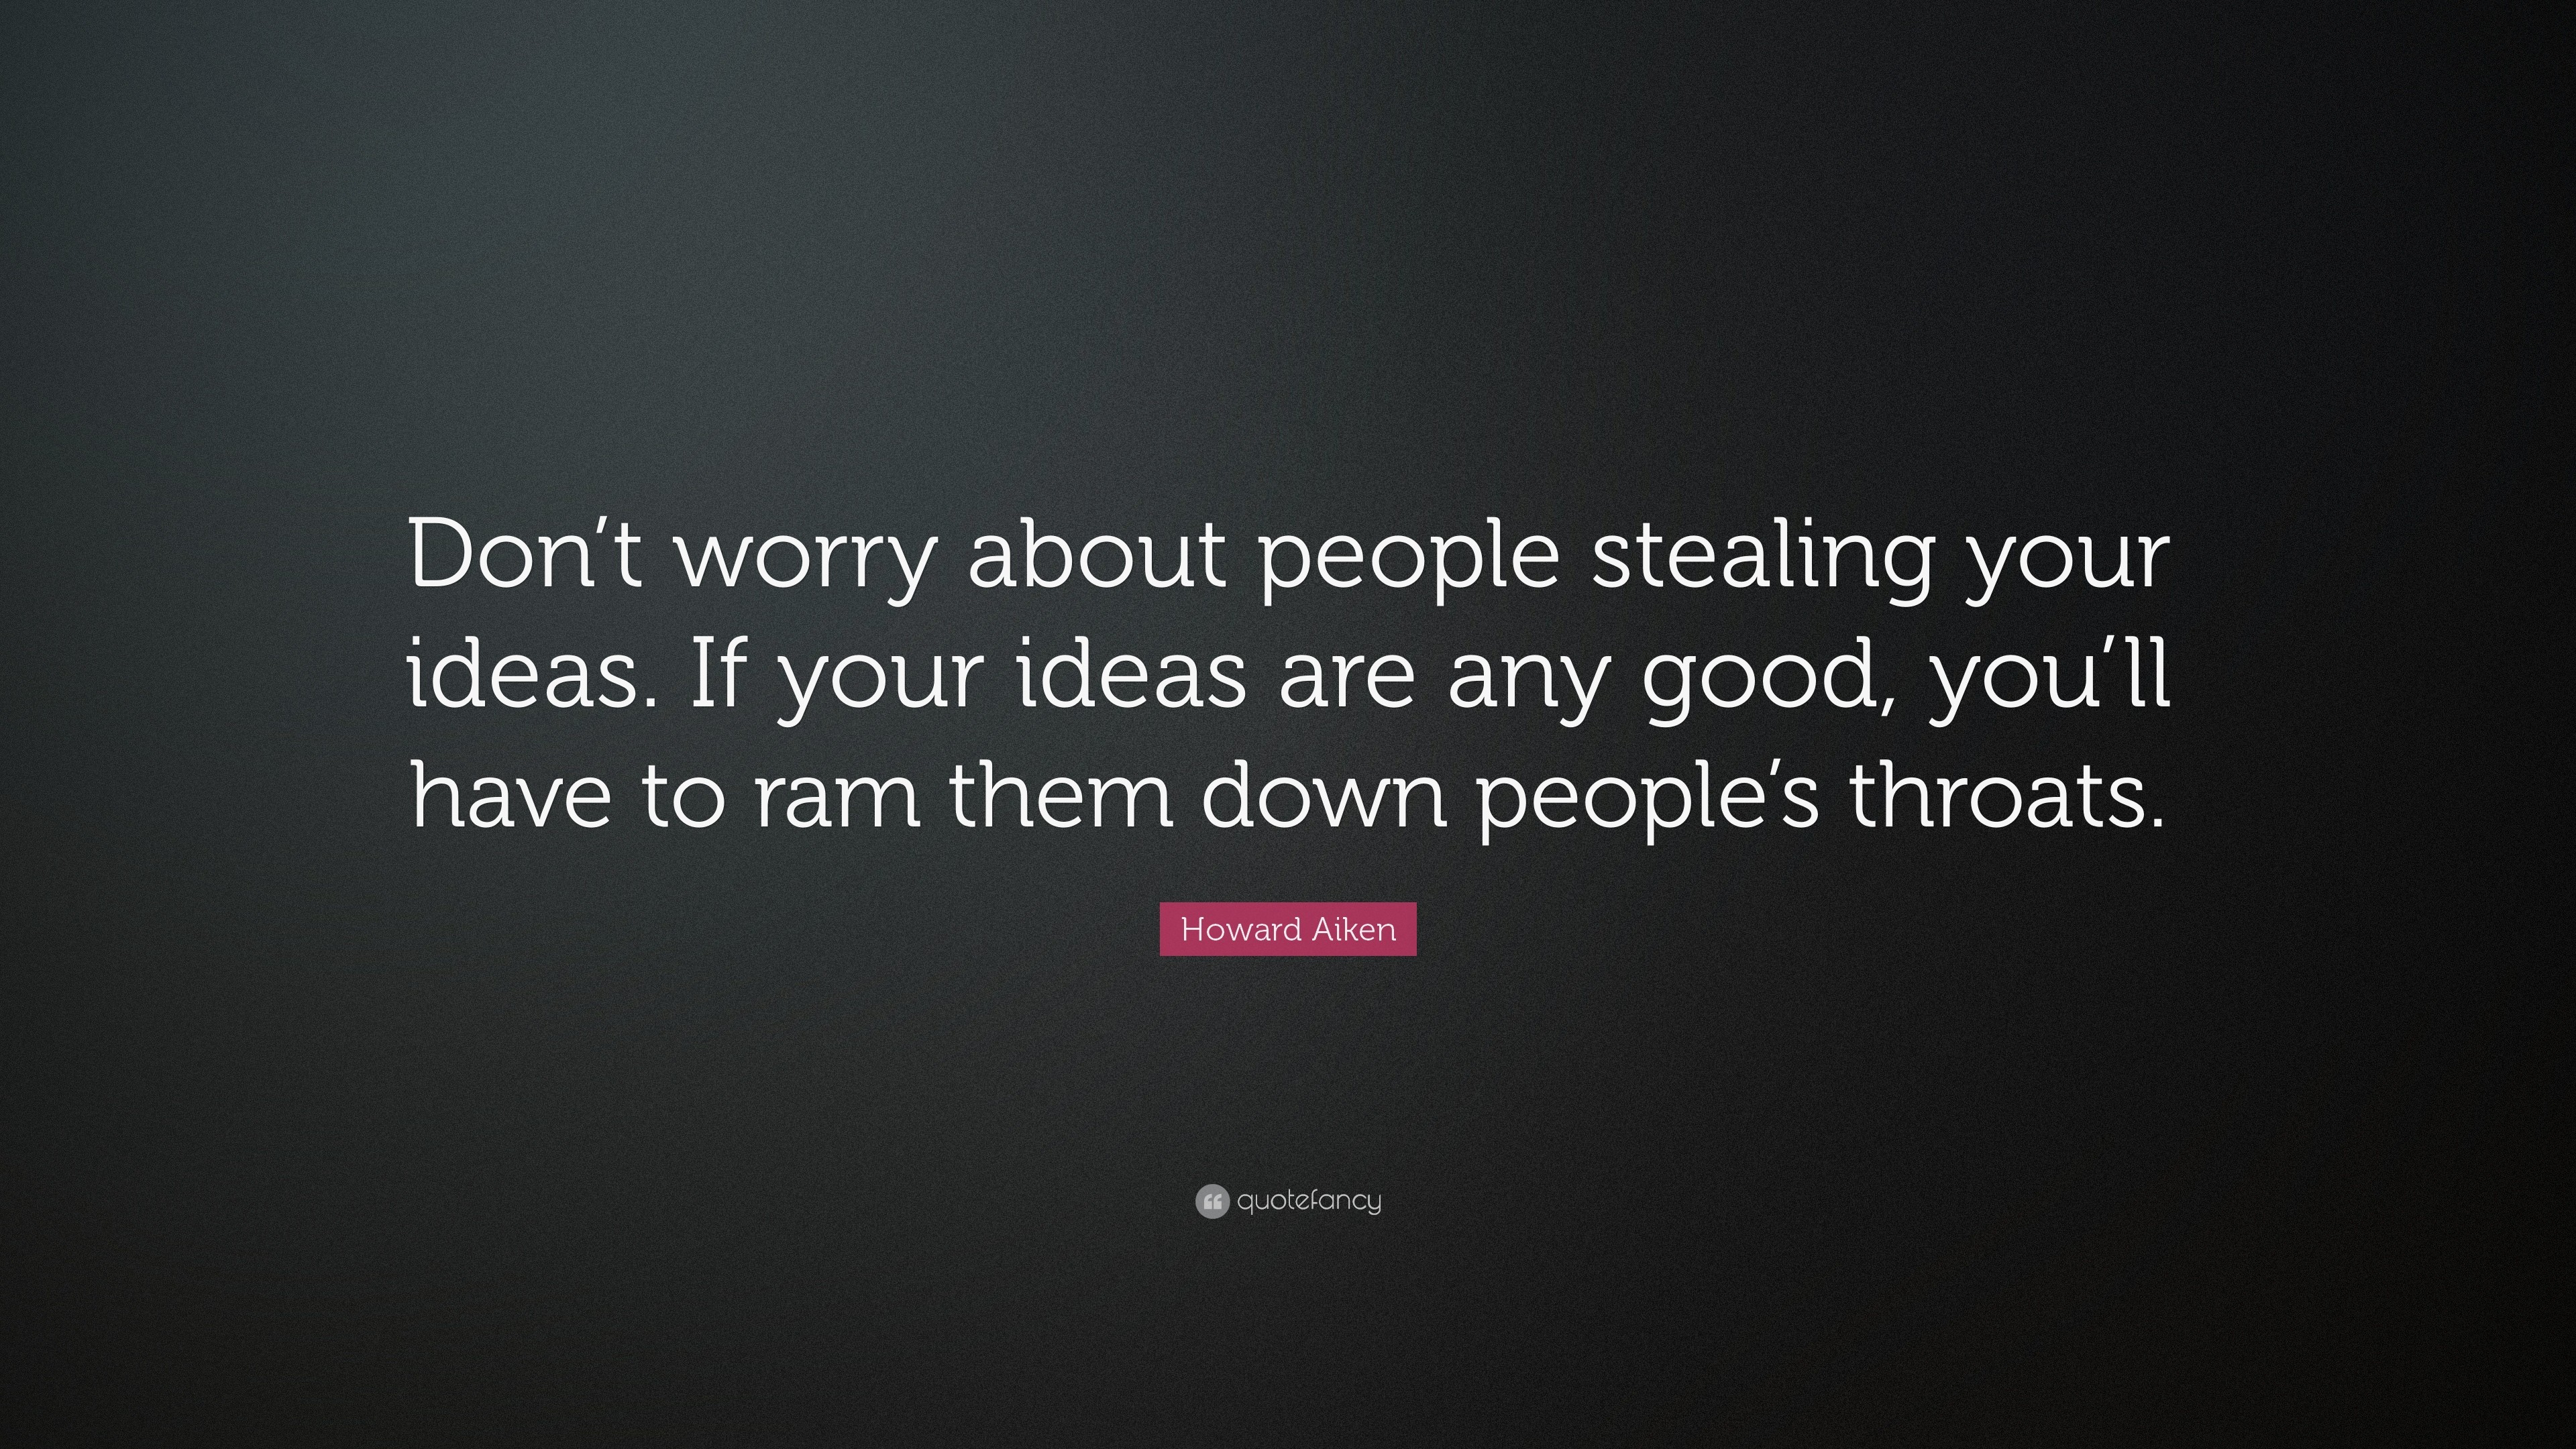 3840x2160 Funny Quotes: “Don't worry about people stealing your ideas. If your